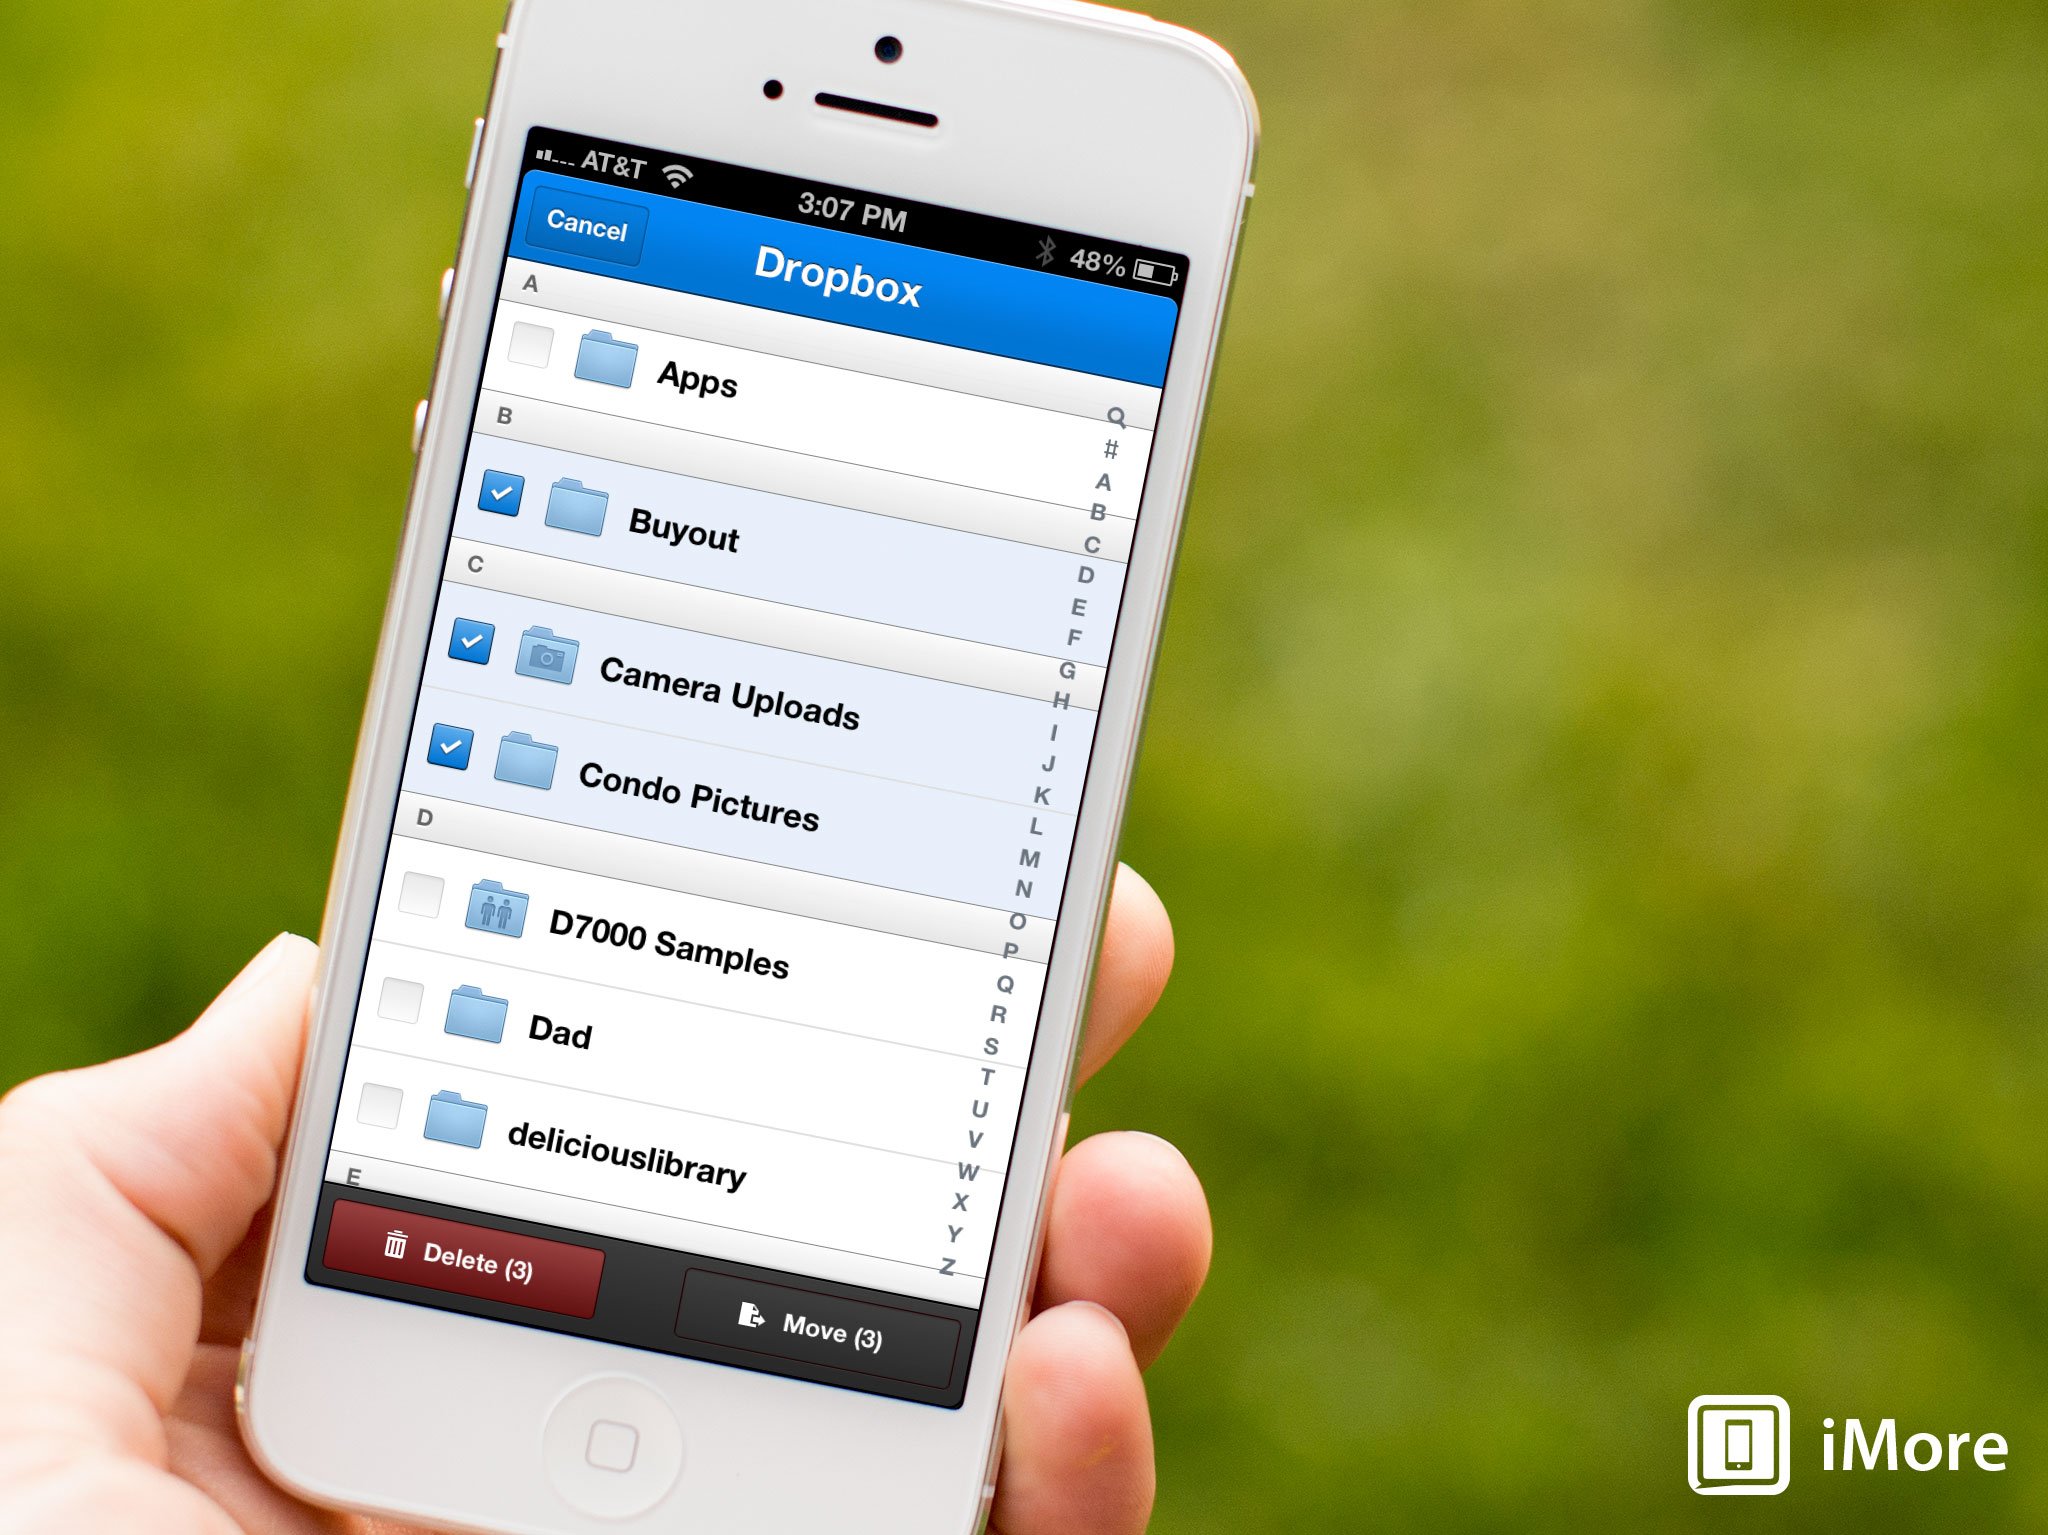 How to delete or move multiple folders at once with Dropbox for iOS